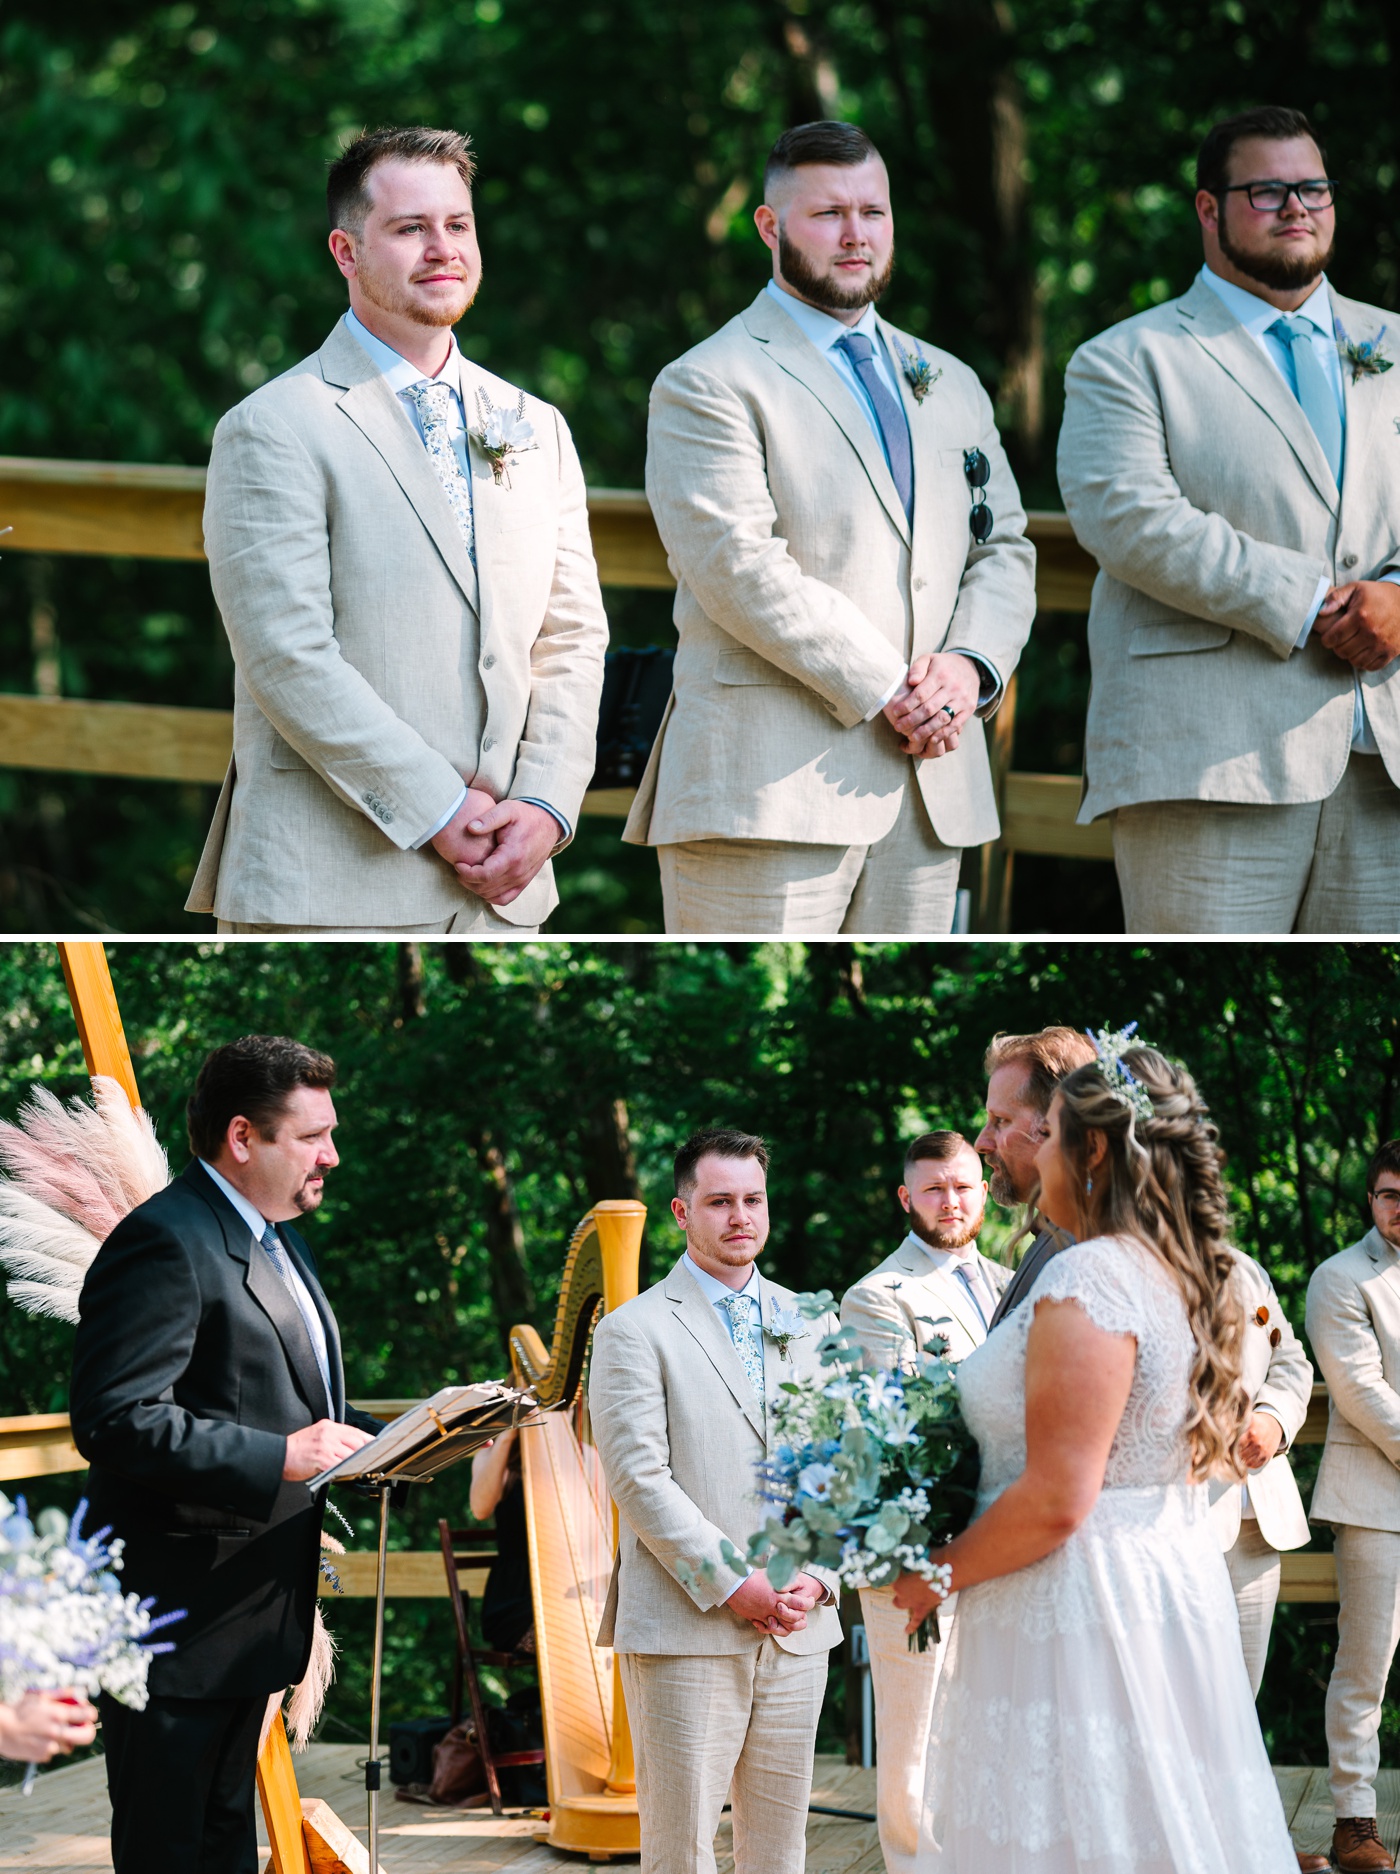 Outdoor wedding ceremony at the Nature Center Amphitheater at Brown County State Park